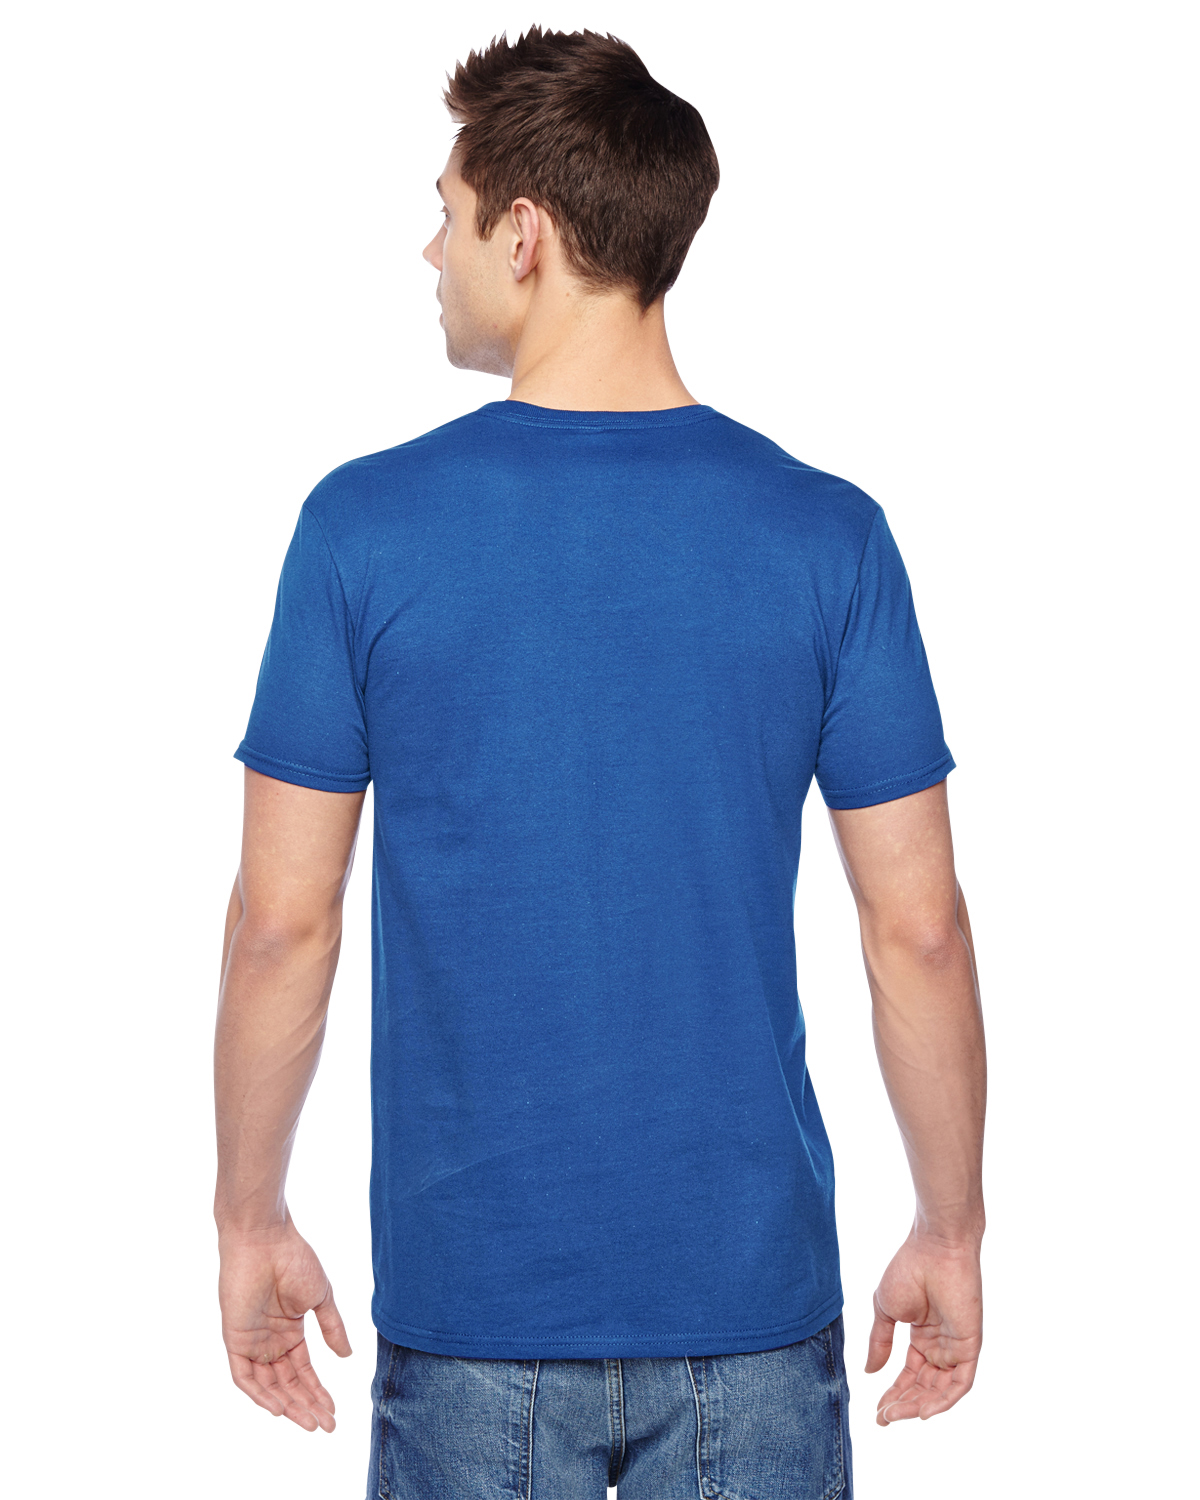 Mens Cotton Jersey Crew T-Shirt SF45R (2 PACK) - image 3 of 3